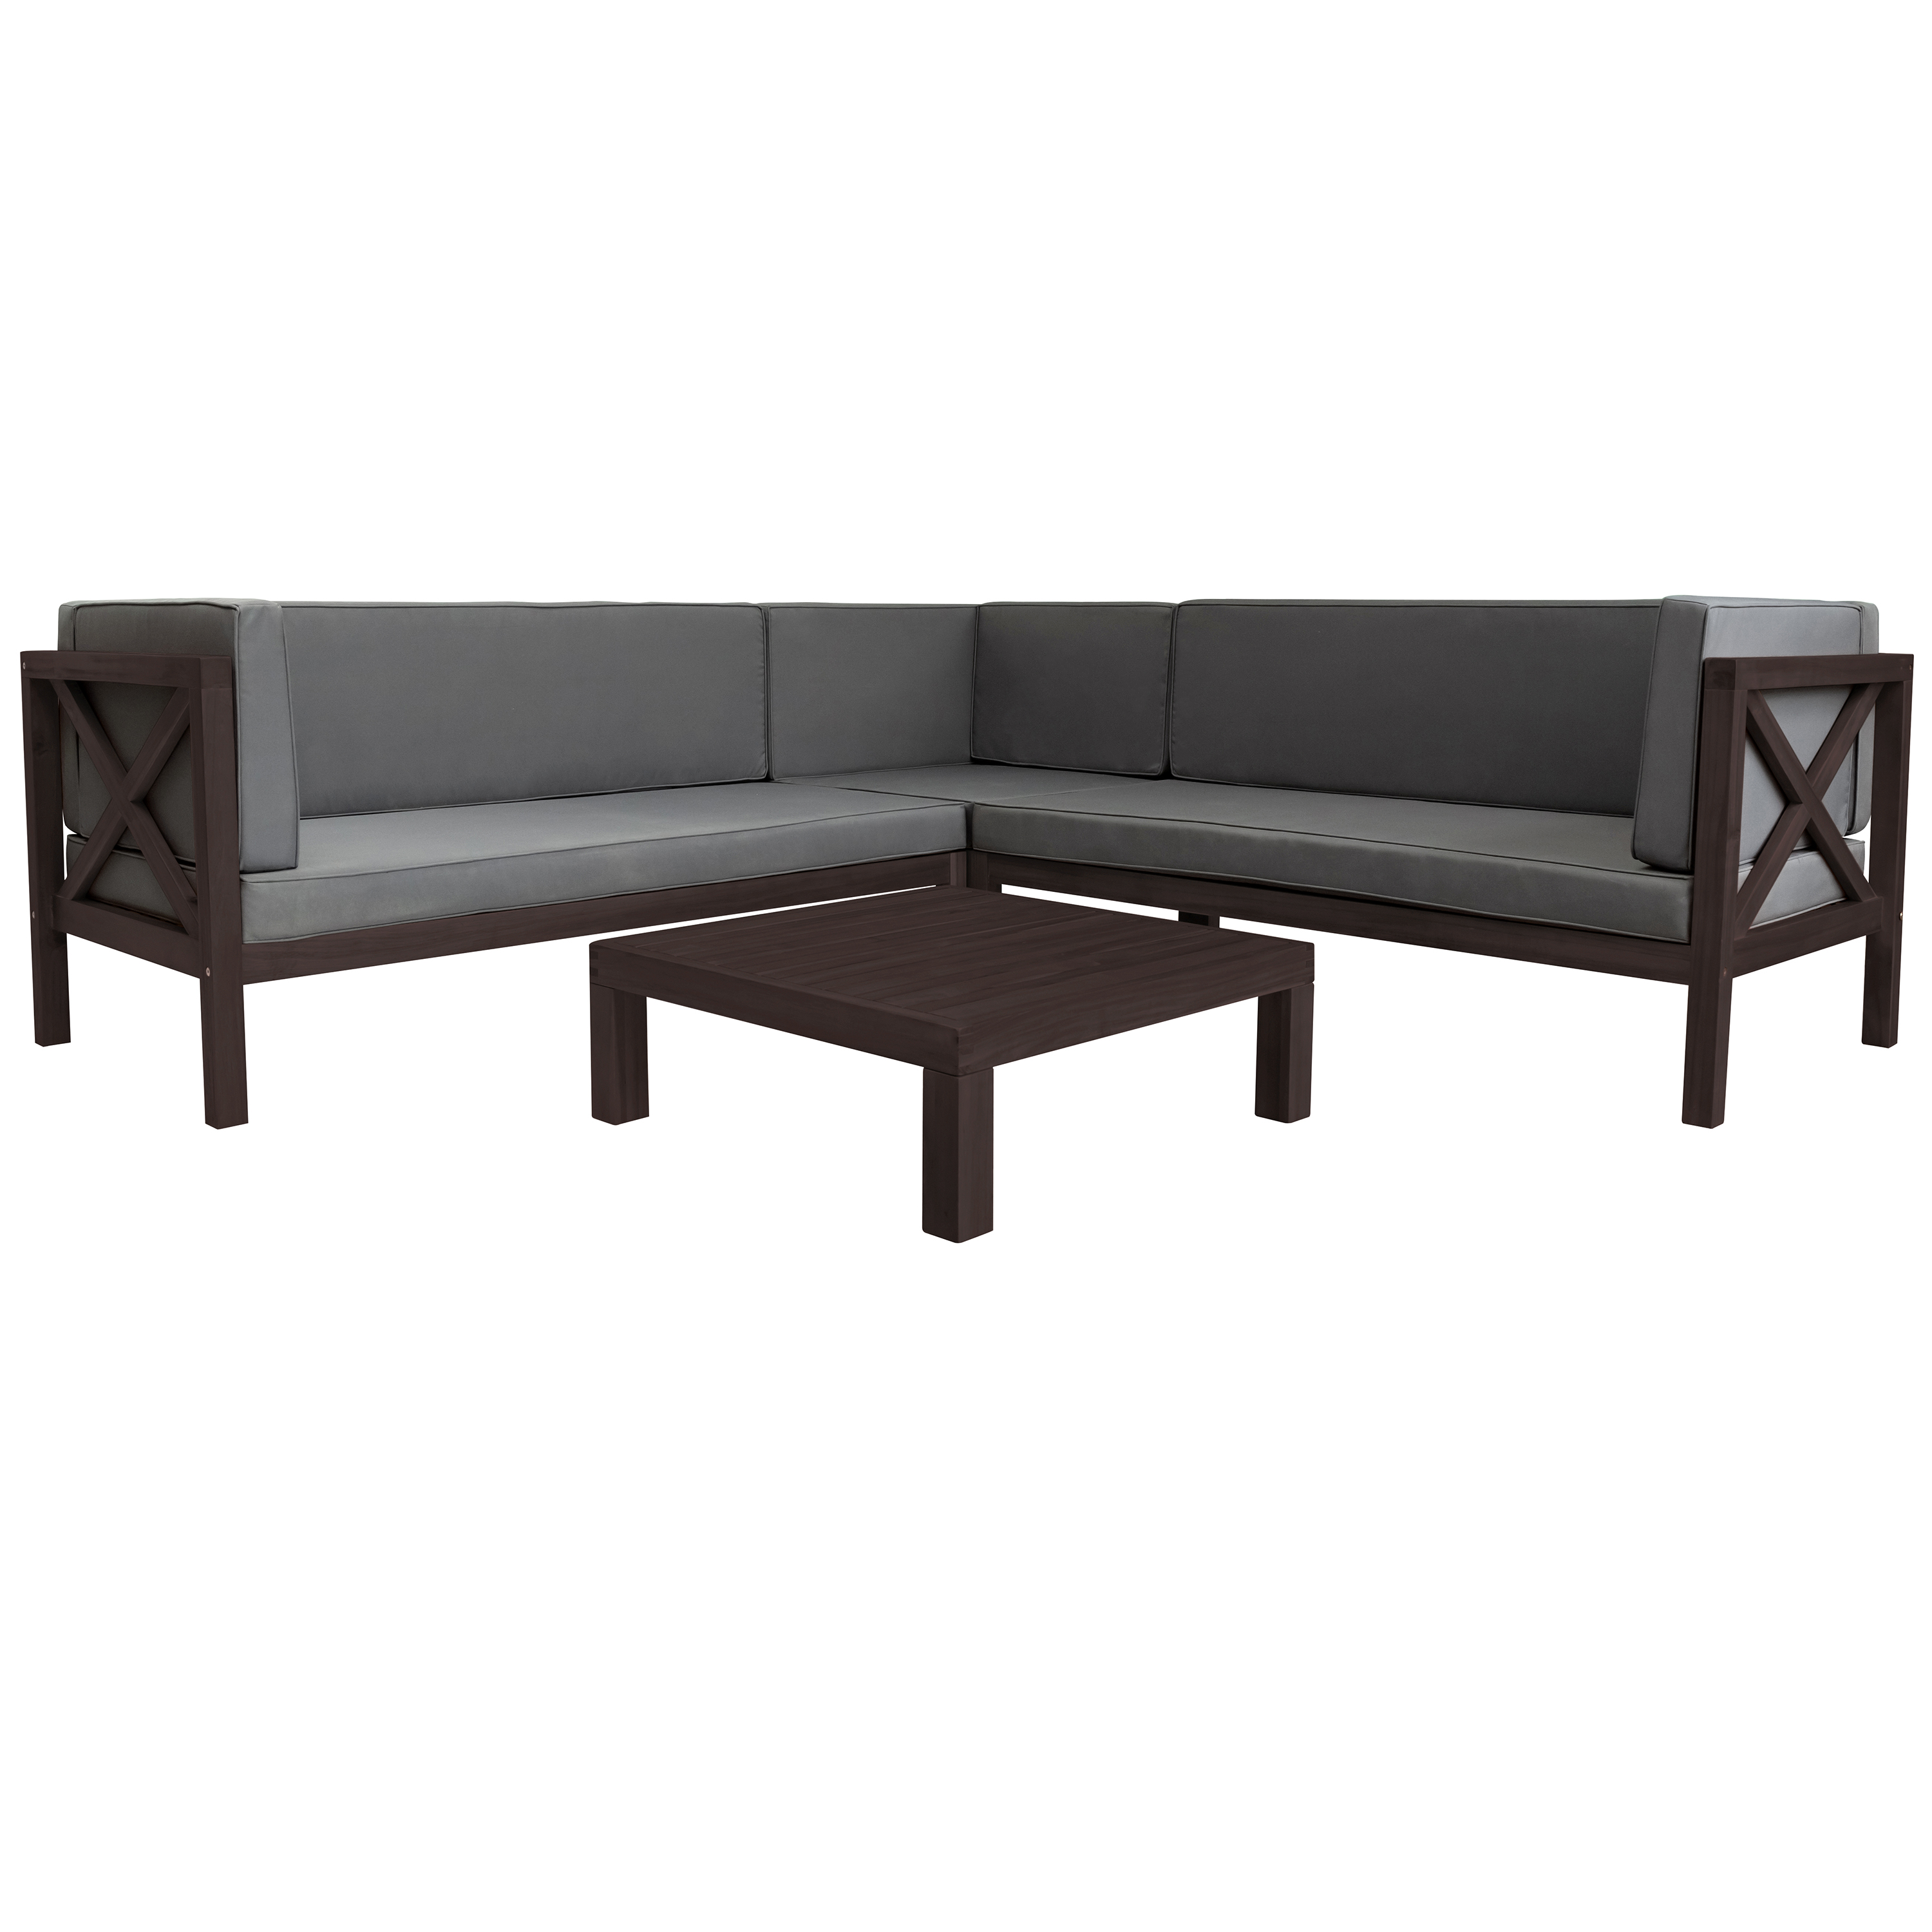  Outdoor Wood Patio Backyard 4-Piece Sectional Seating Group with Cushions and Table X-Back Sofa Set for Small Places, Brown Finish+Gray Cushions-CASAINC